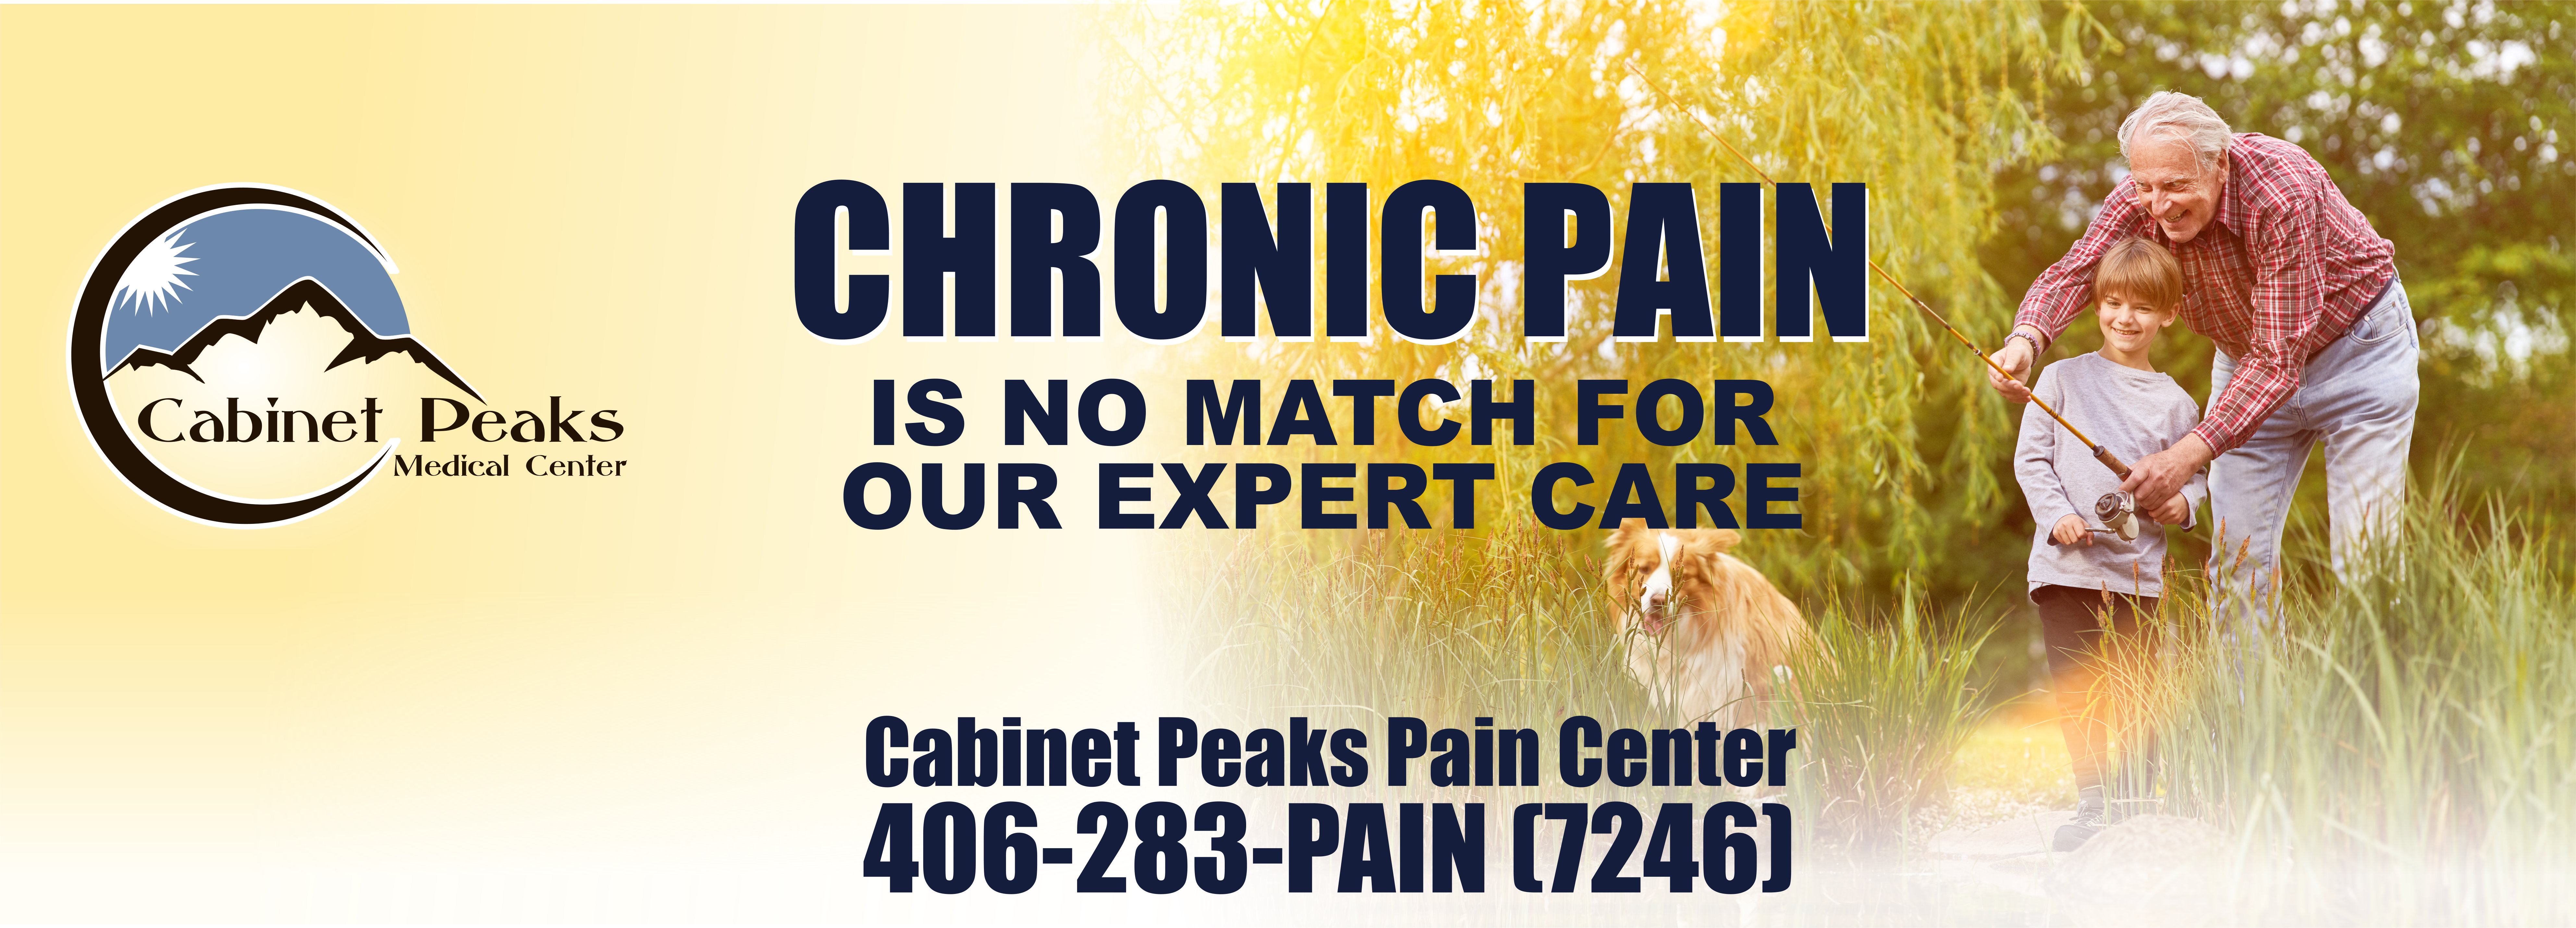 EXPANDED SERVICES
Close to Home
STOP WAITING. START LIVING. RELIEF IS HERE.

PARTNERING TO BRING YOU A PERSONAL APPROACH TO CHRONIC PAIN MANAGEMENT

FOR MORE INFORMATION:
406-283-PAIN (7246)

Holistic 
PAIN MANAGEMENT

Cabinet Peaks Medical Center